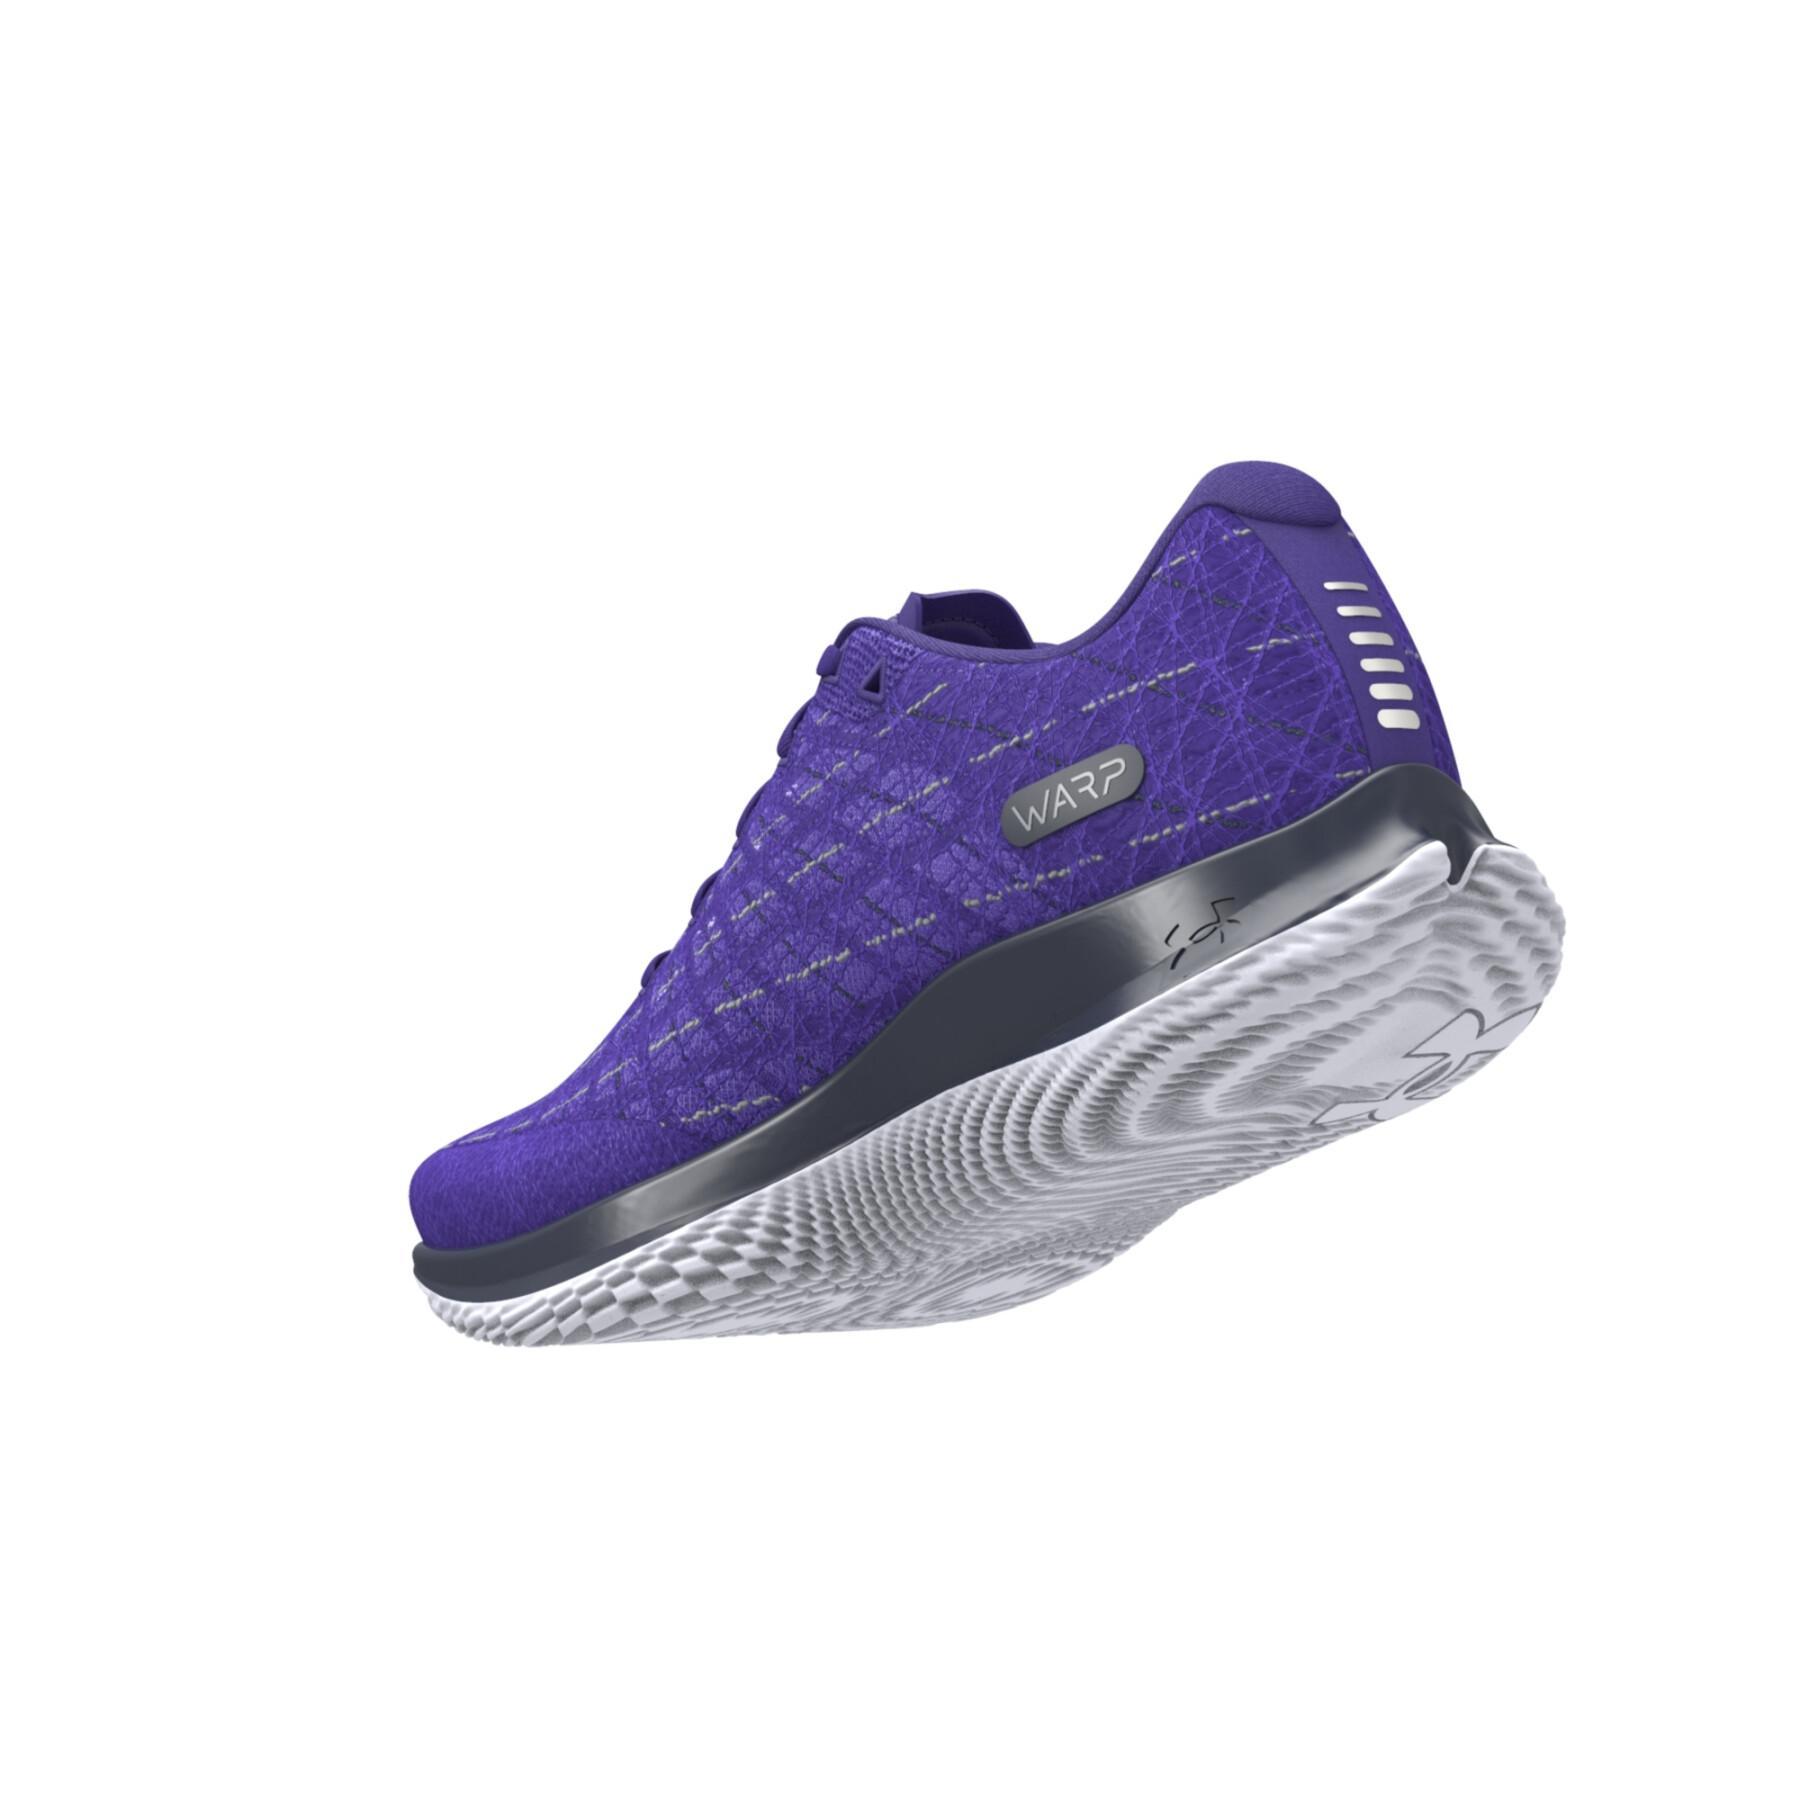 Women's running shoes Under Armour FLOW Velociti Wind